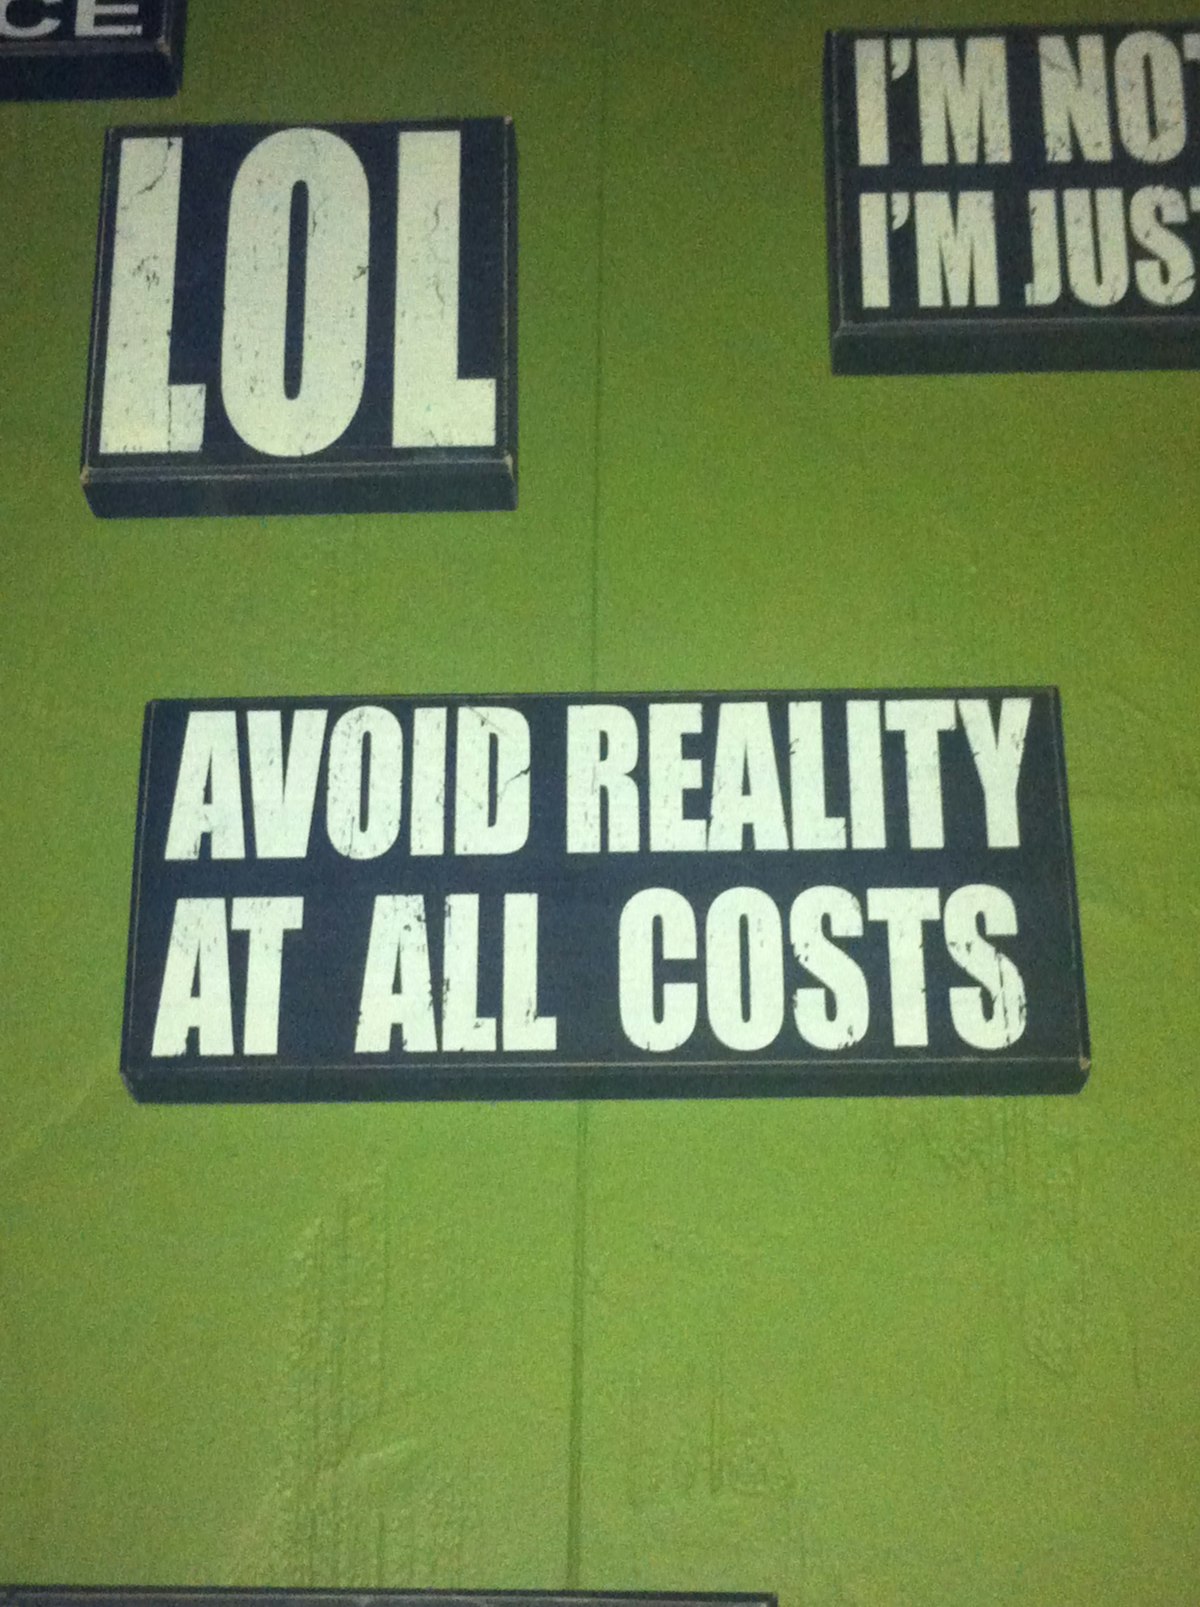 A few of the signs that adorn the walls of Bialystok Pub in Chicago.